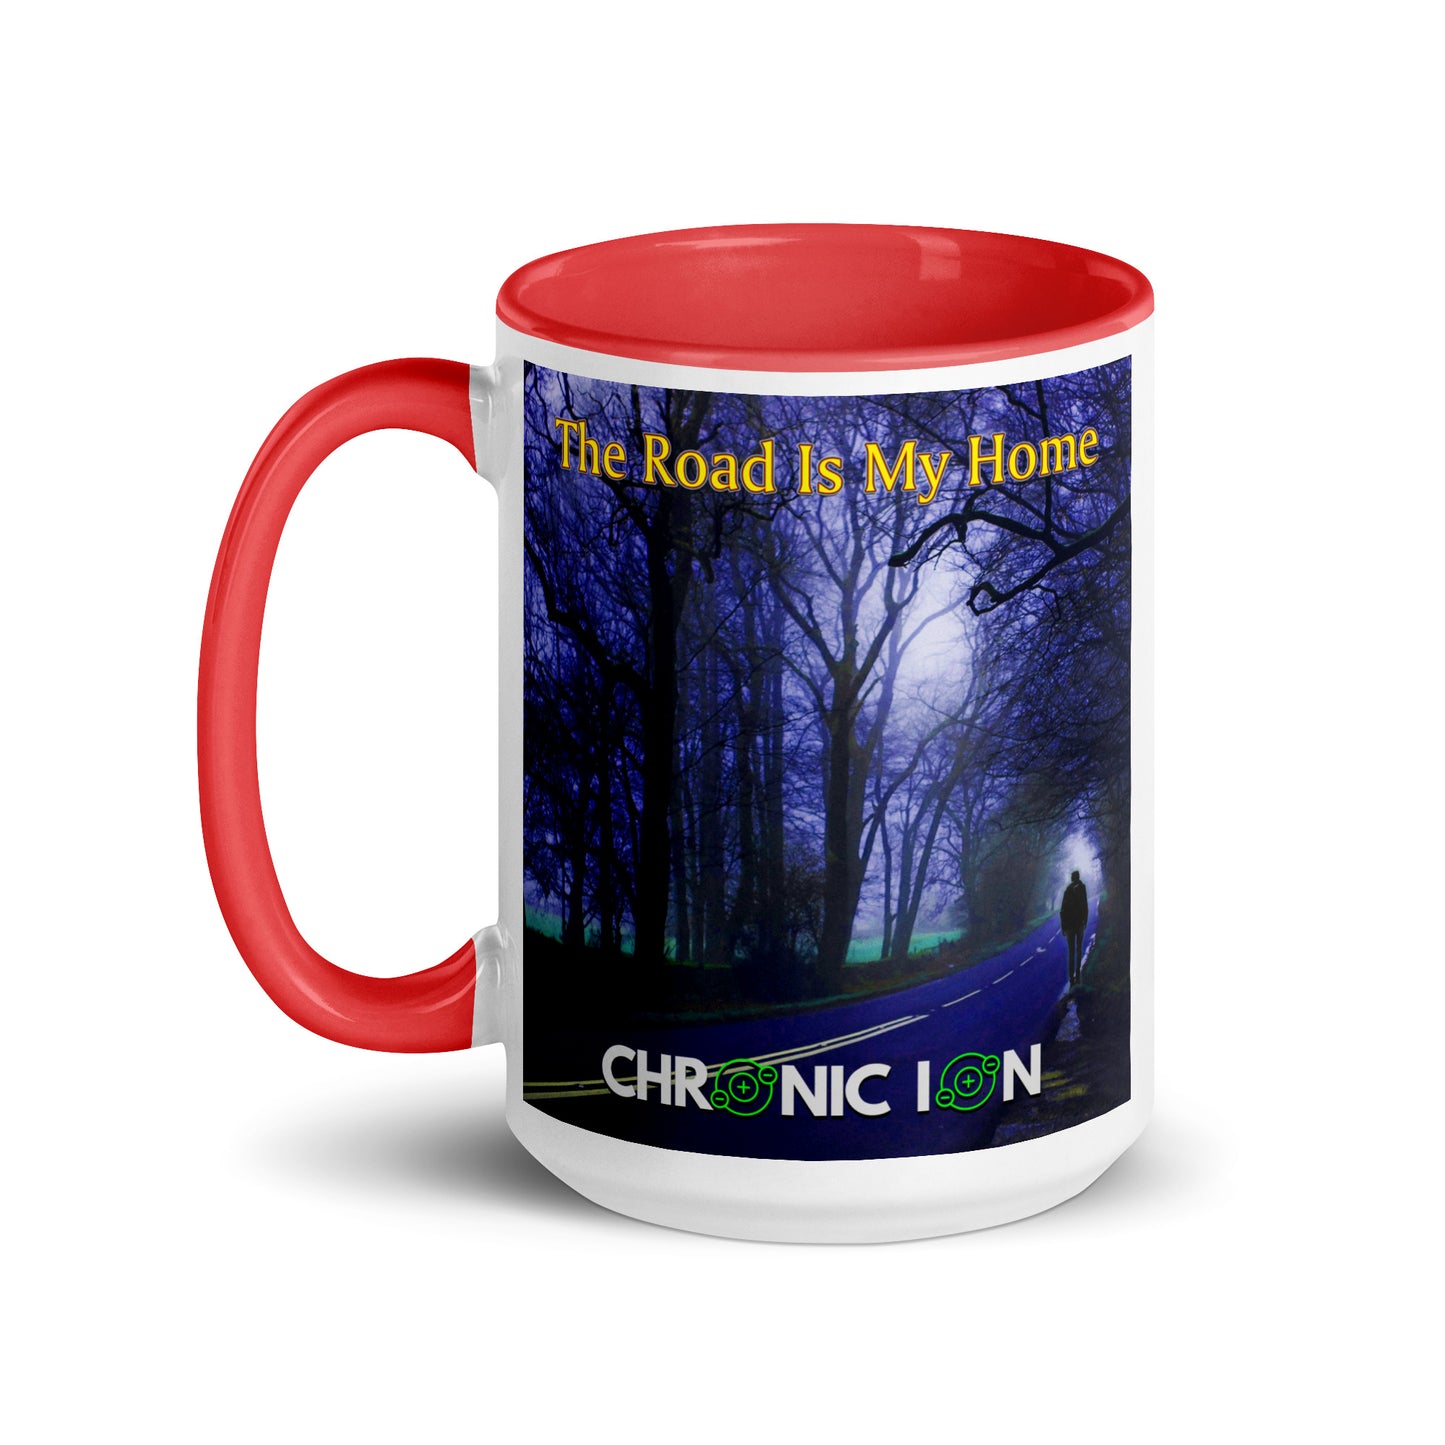 Chronic Ion - The Road Is My Home Mug With Color Inside